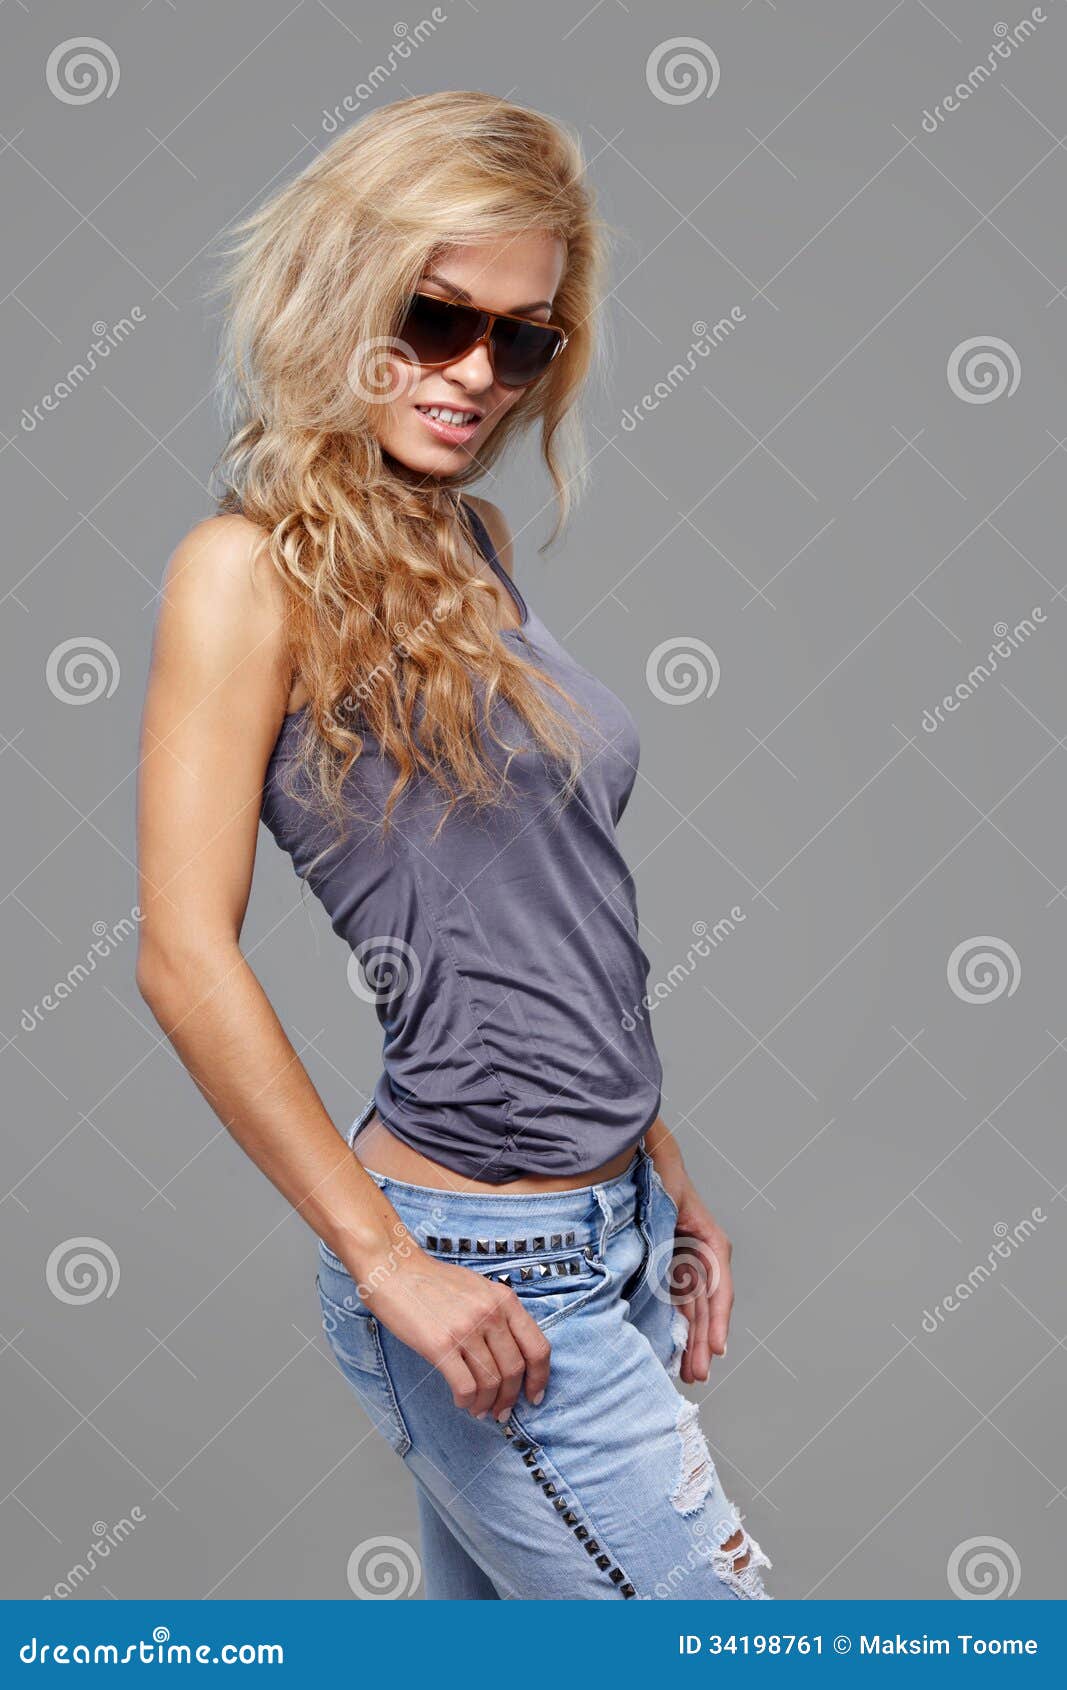 Babe stock image. Image of party, caucasian, lady, delight - 34198761